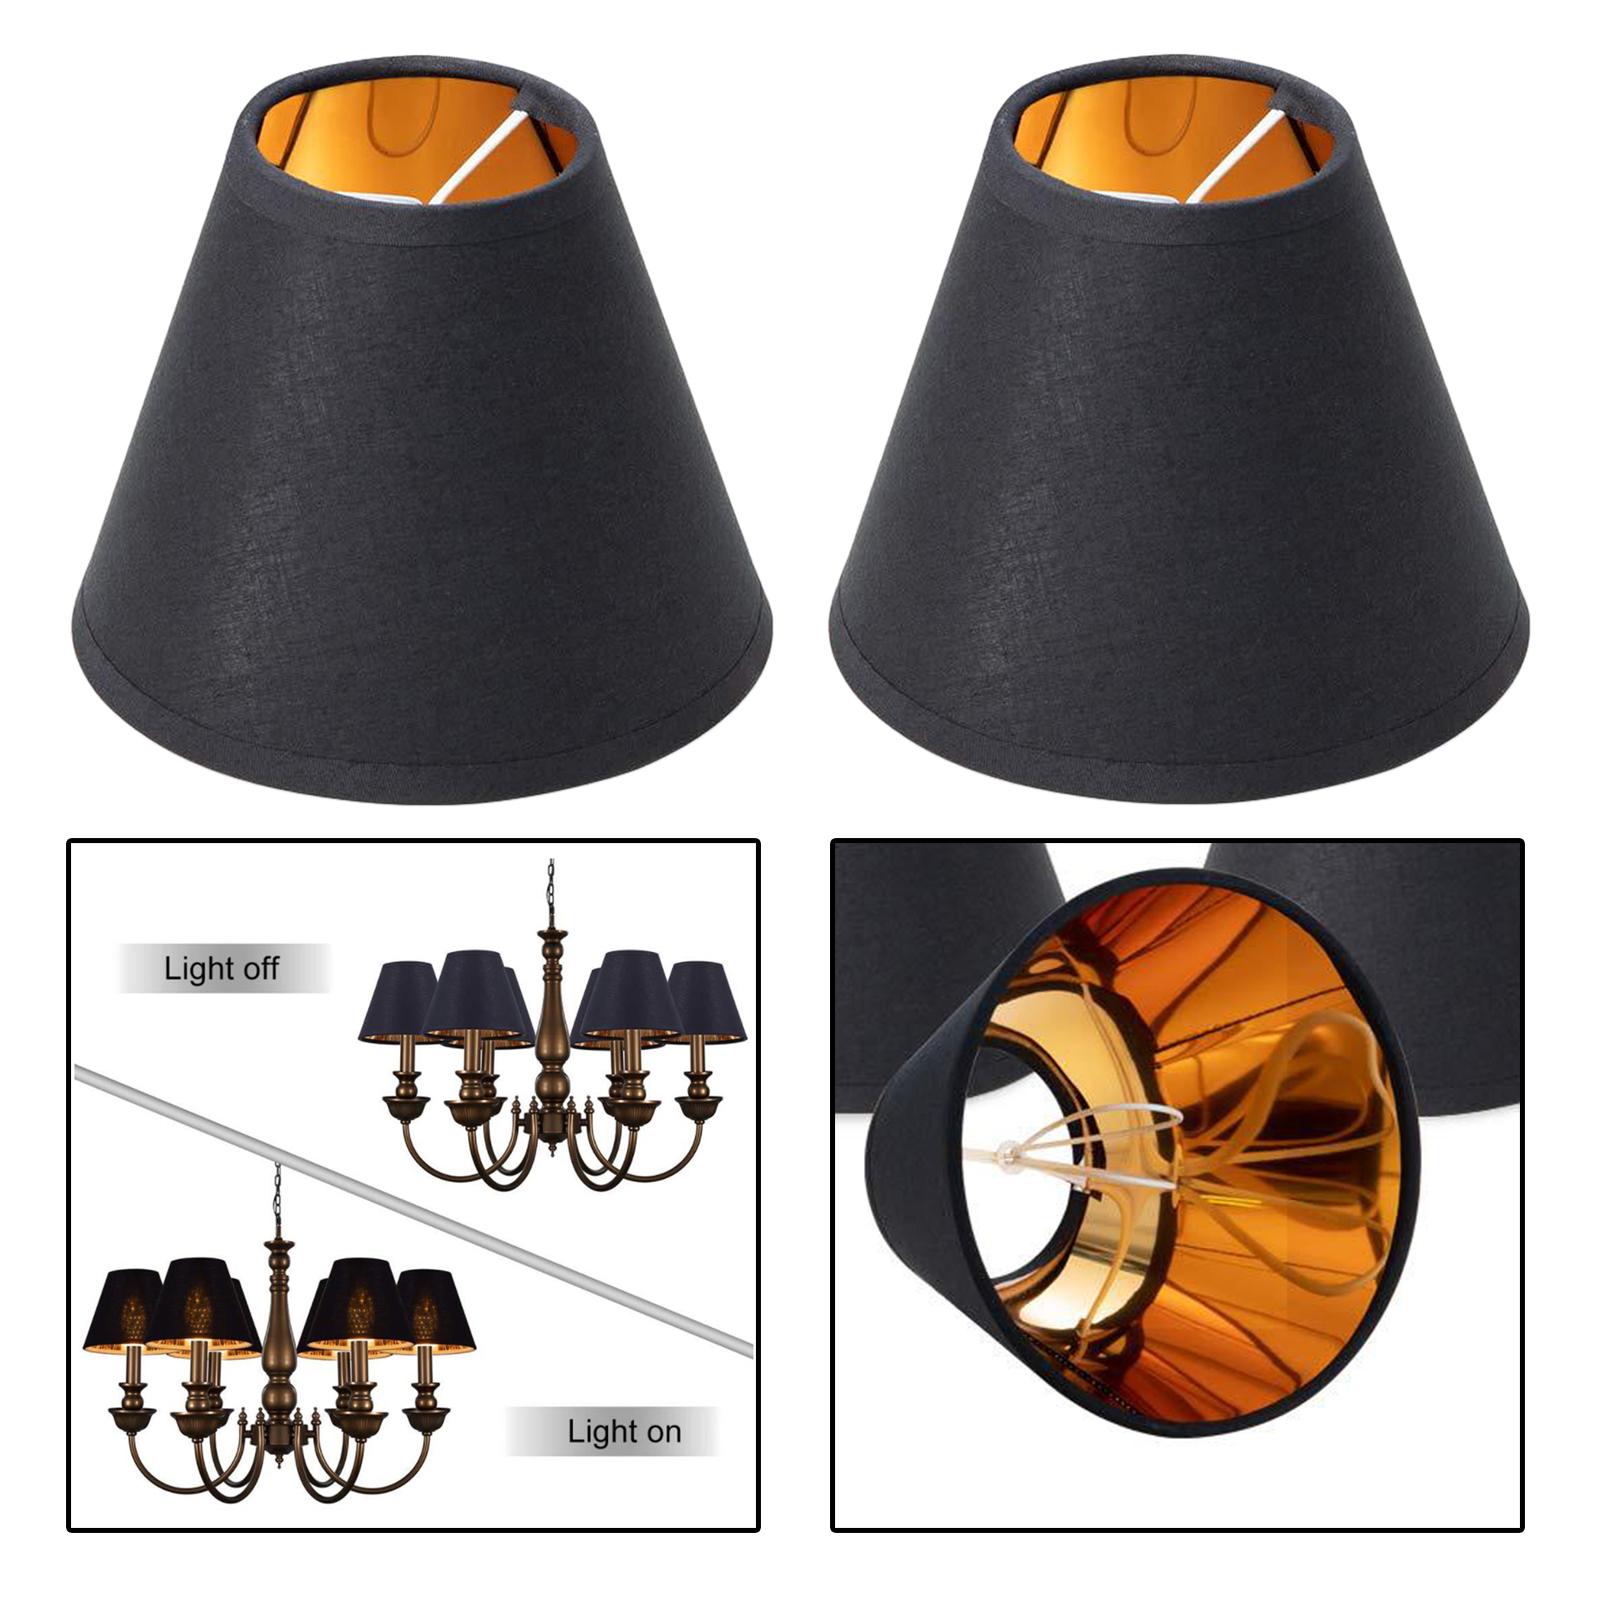 2x Pastoral Style Lamp Shade Lamp Dust Cover Clip On Cloth Hanging Light Black